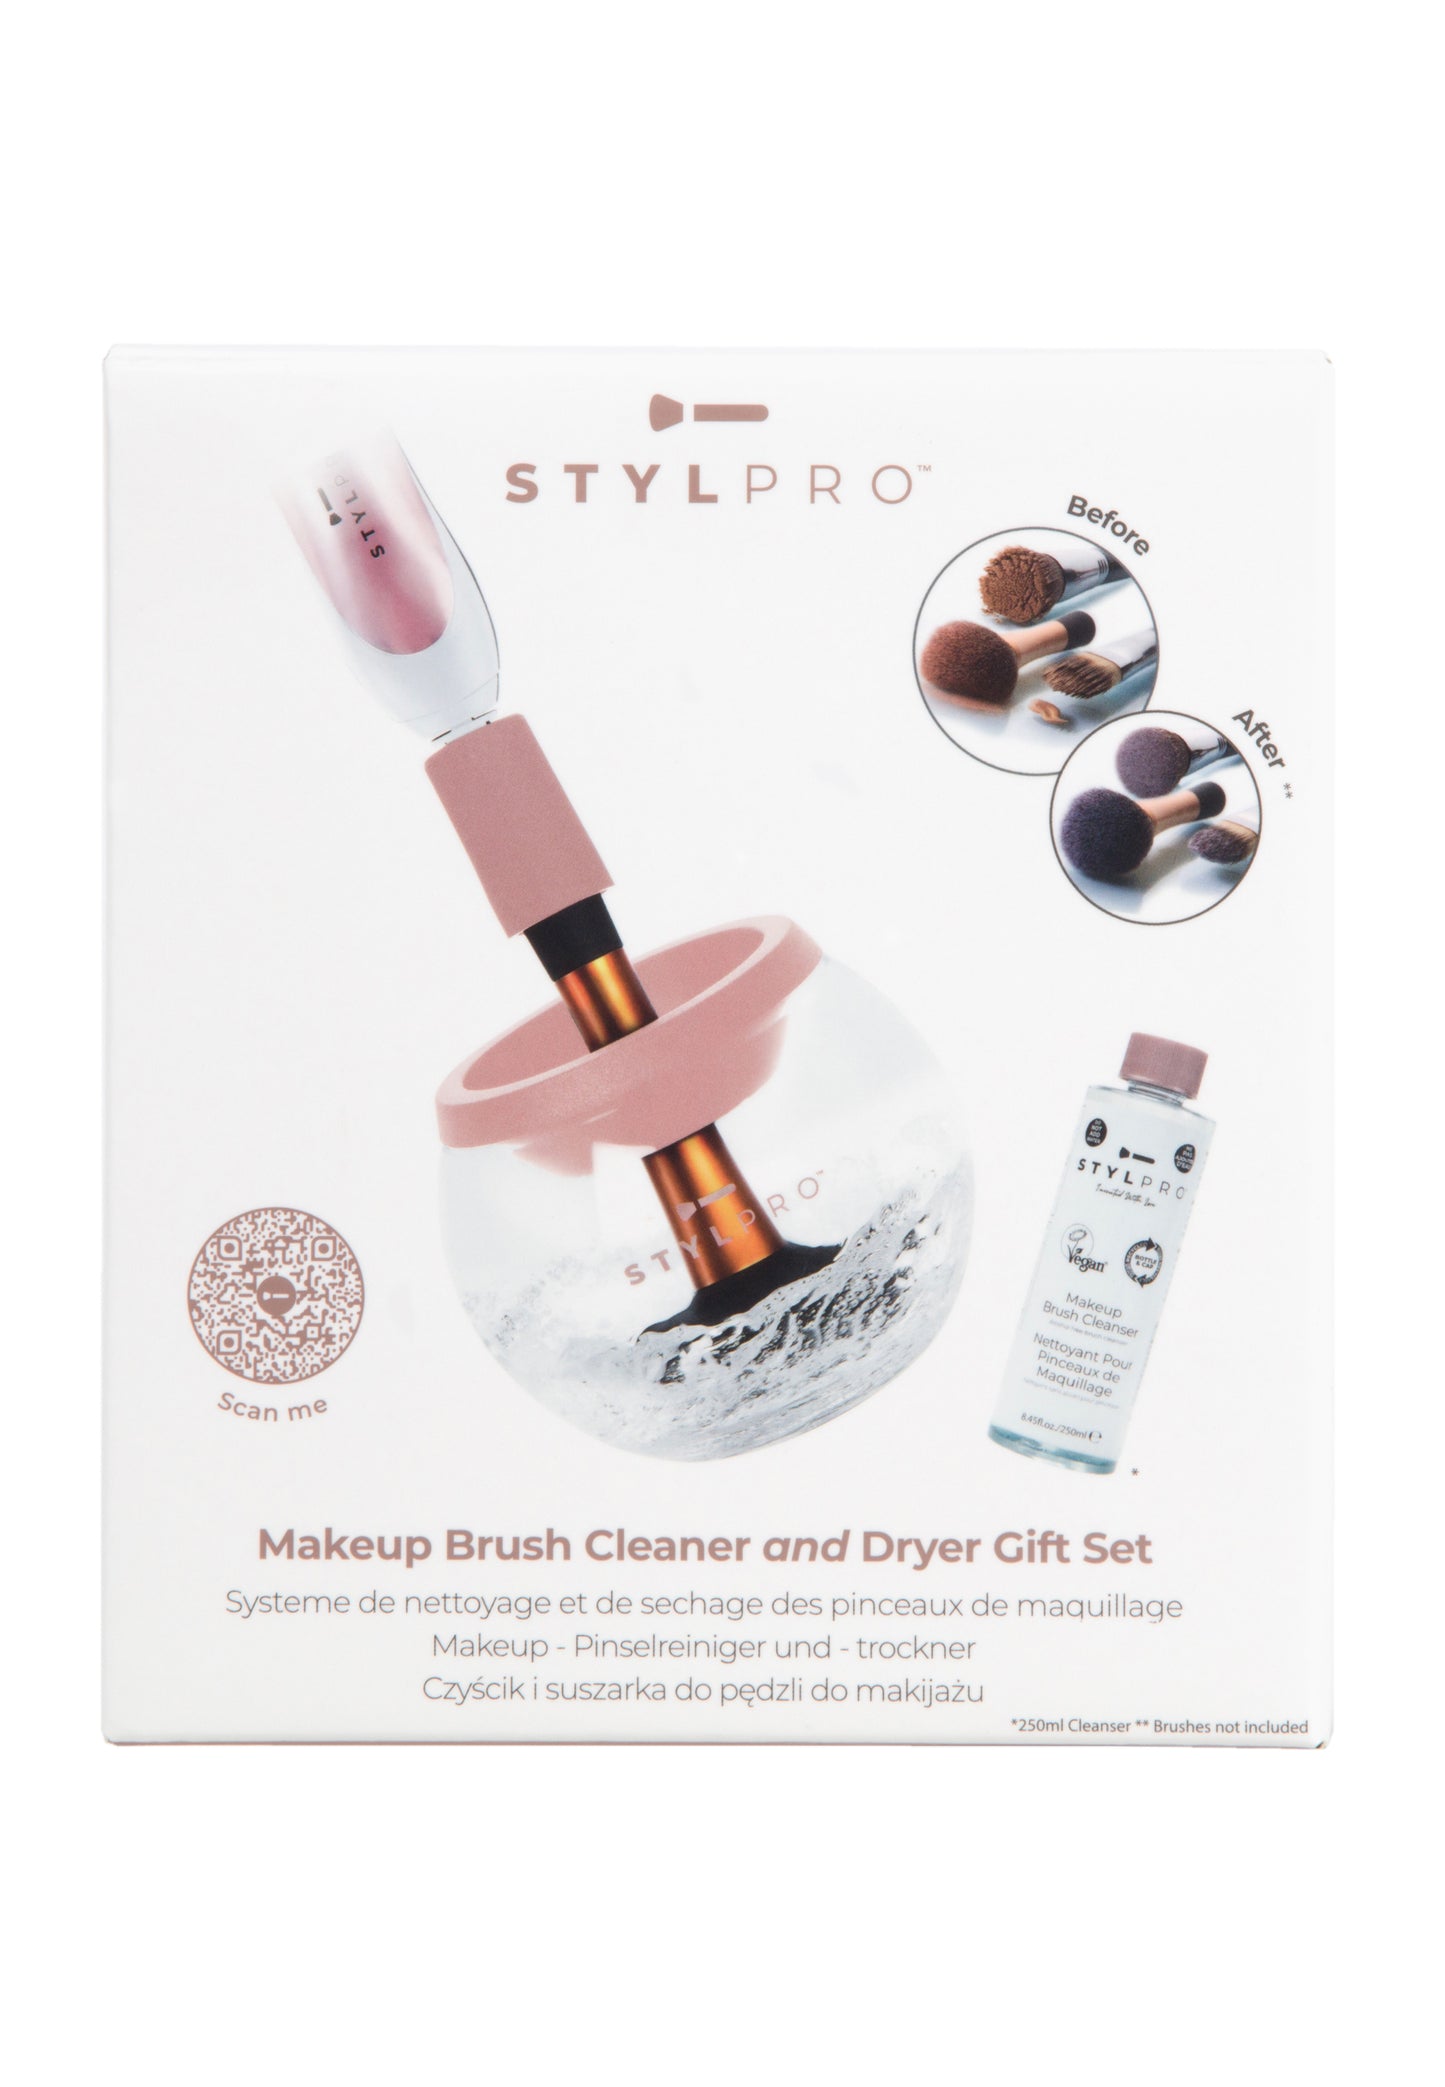 STYLPRO Cleaner Gift Set